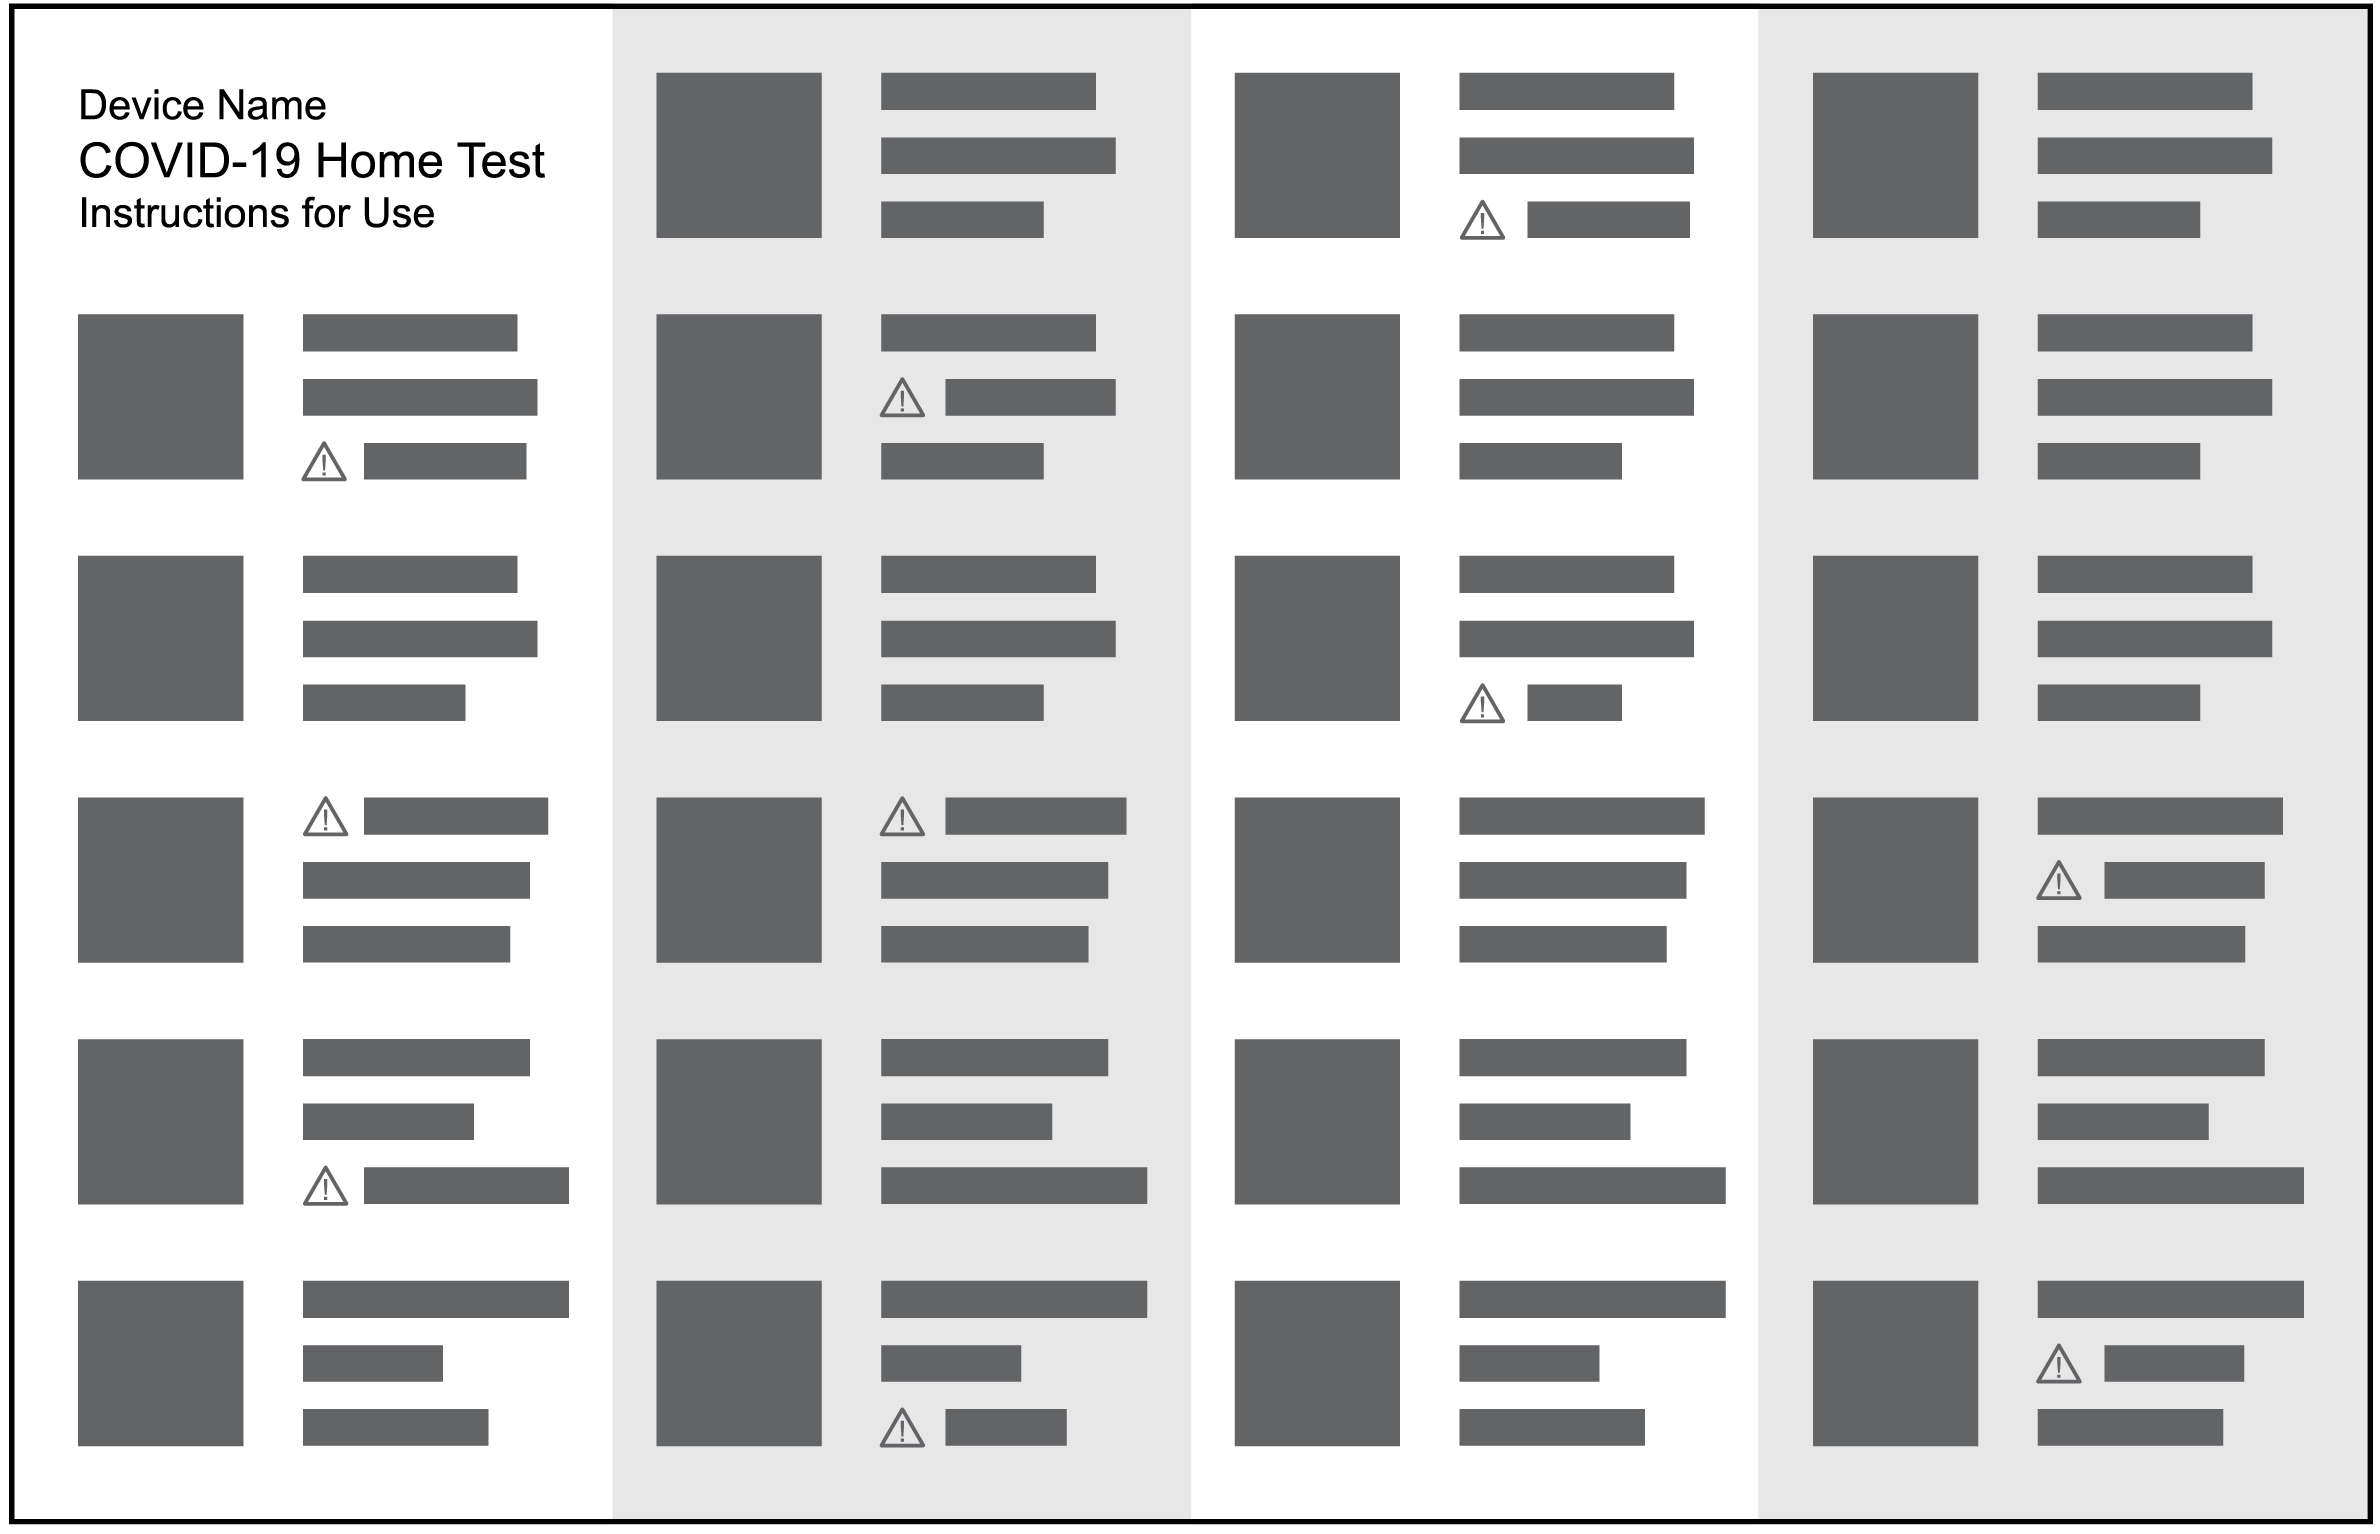 Test instructions with warning symbols and messages in gray and blending with the rest of the text.